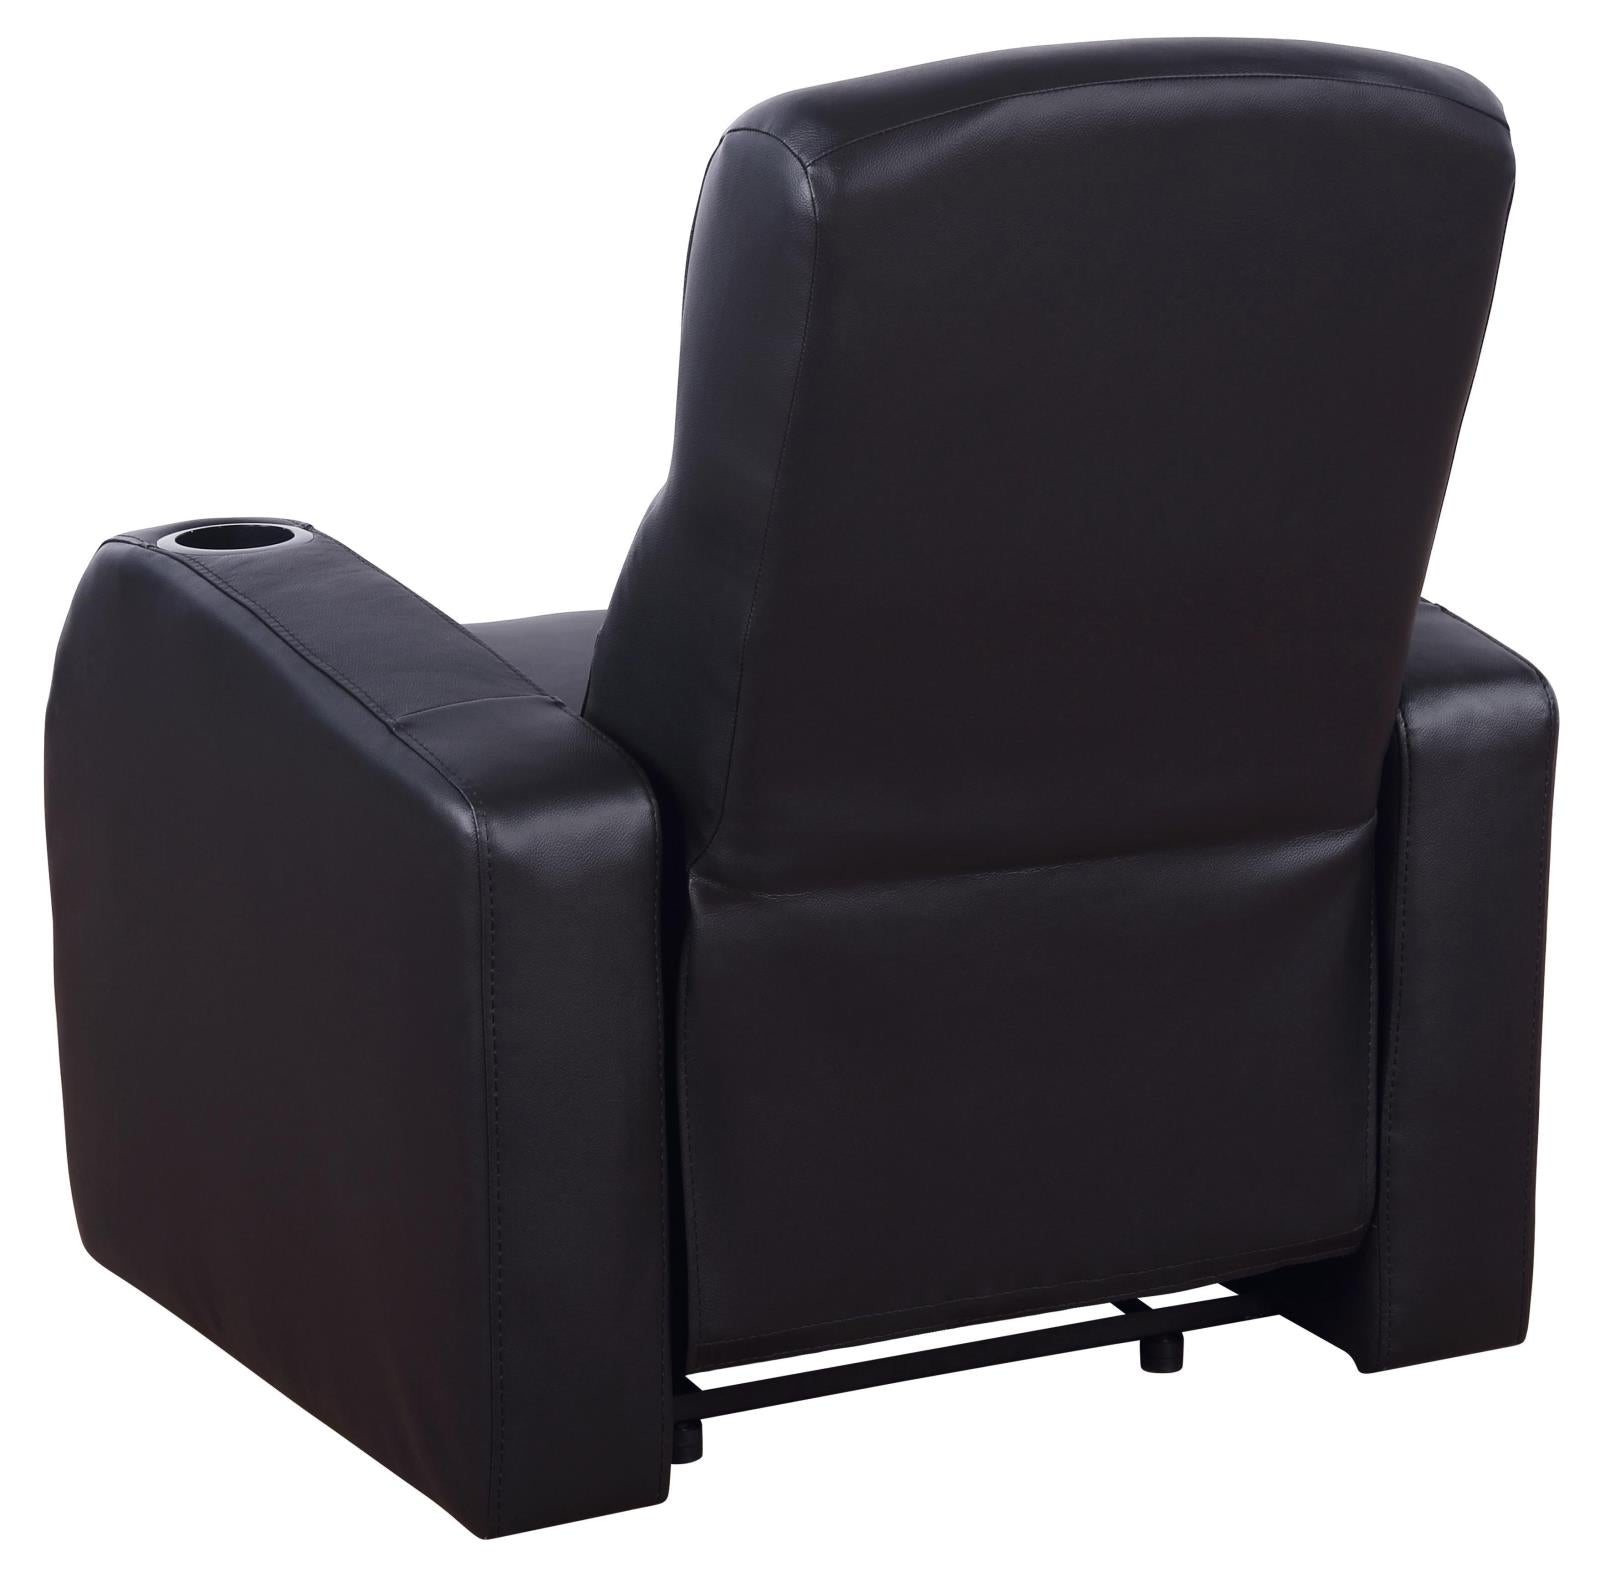 Cyrus Upholstered Recliner Living Room Set Black - What A Room